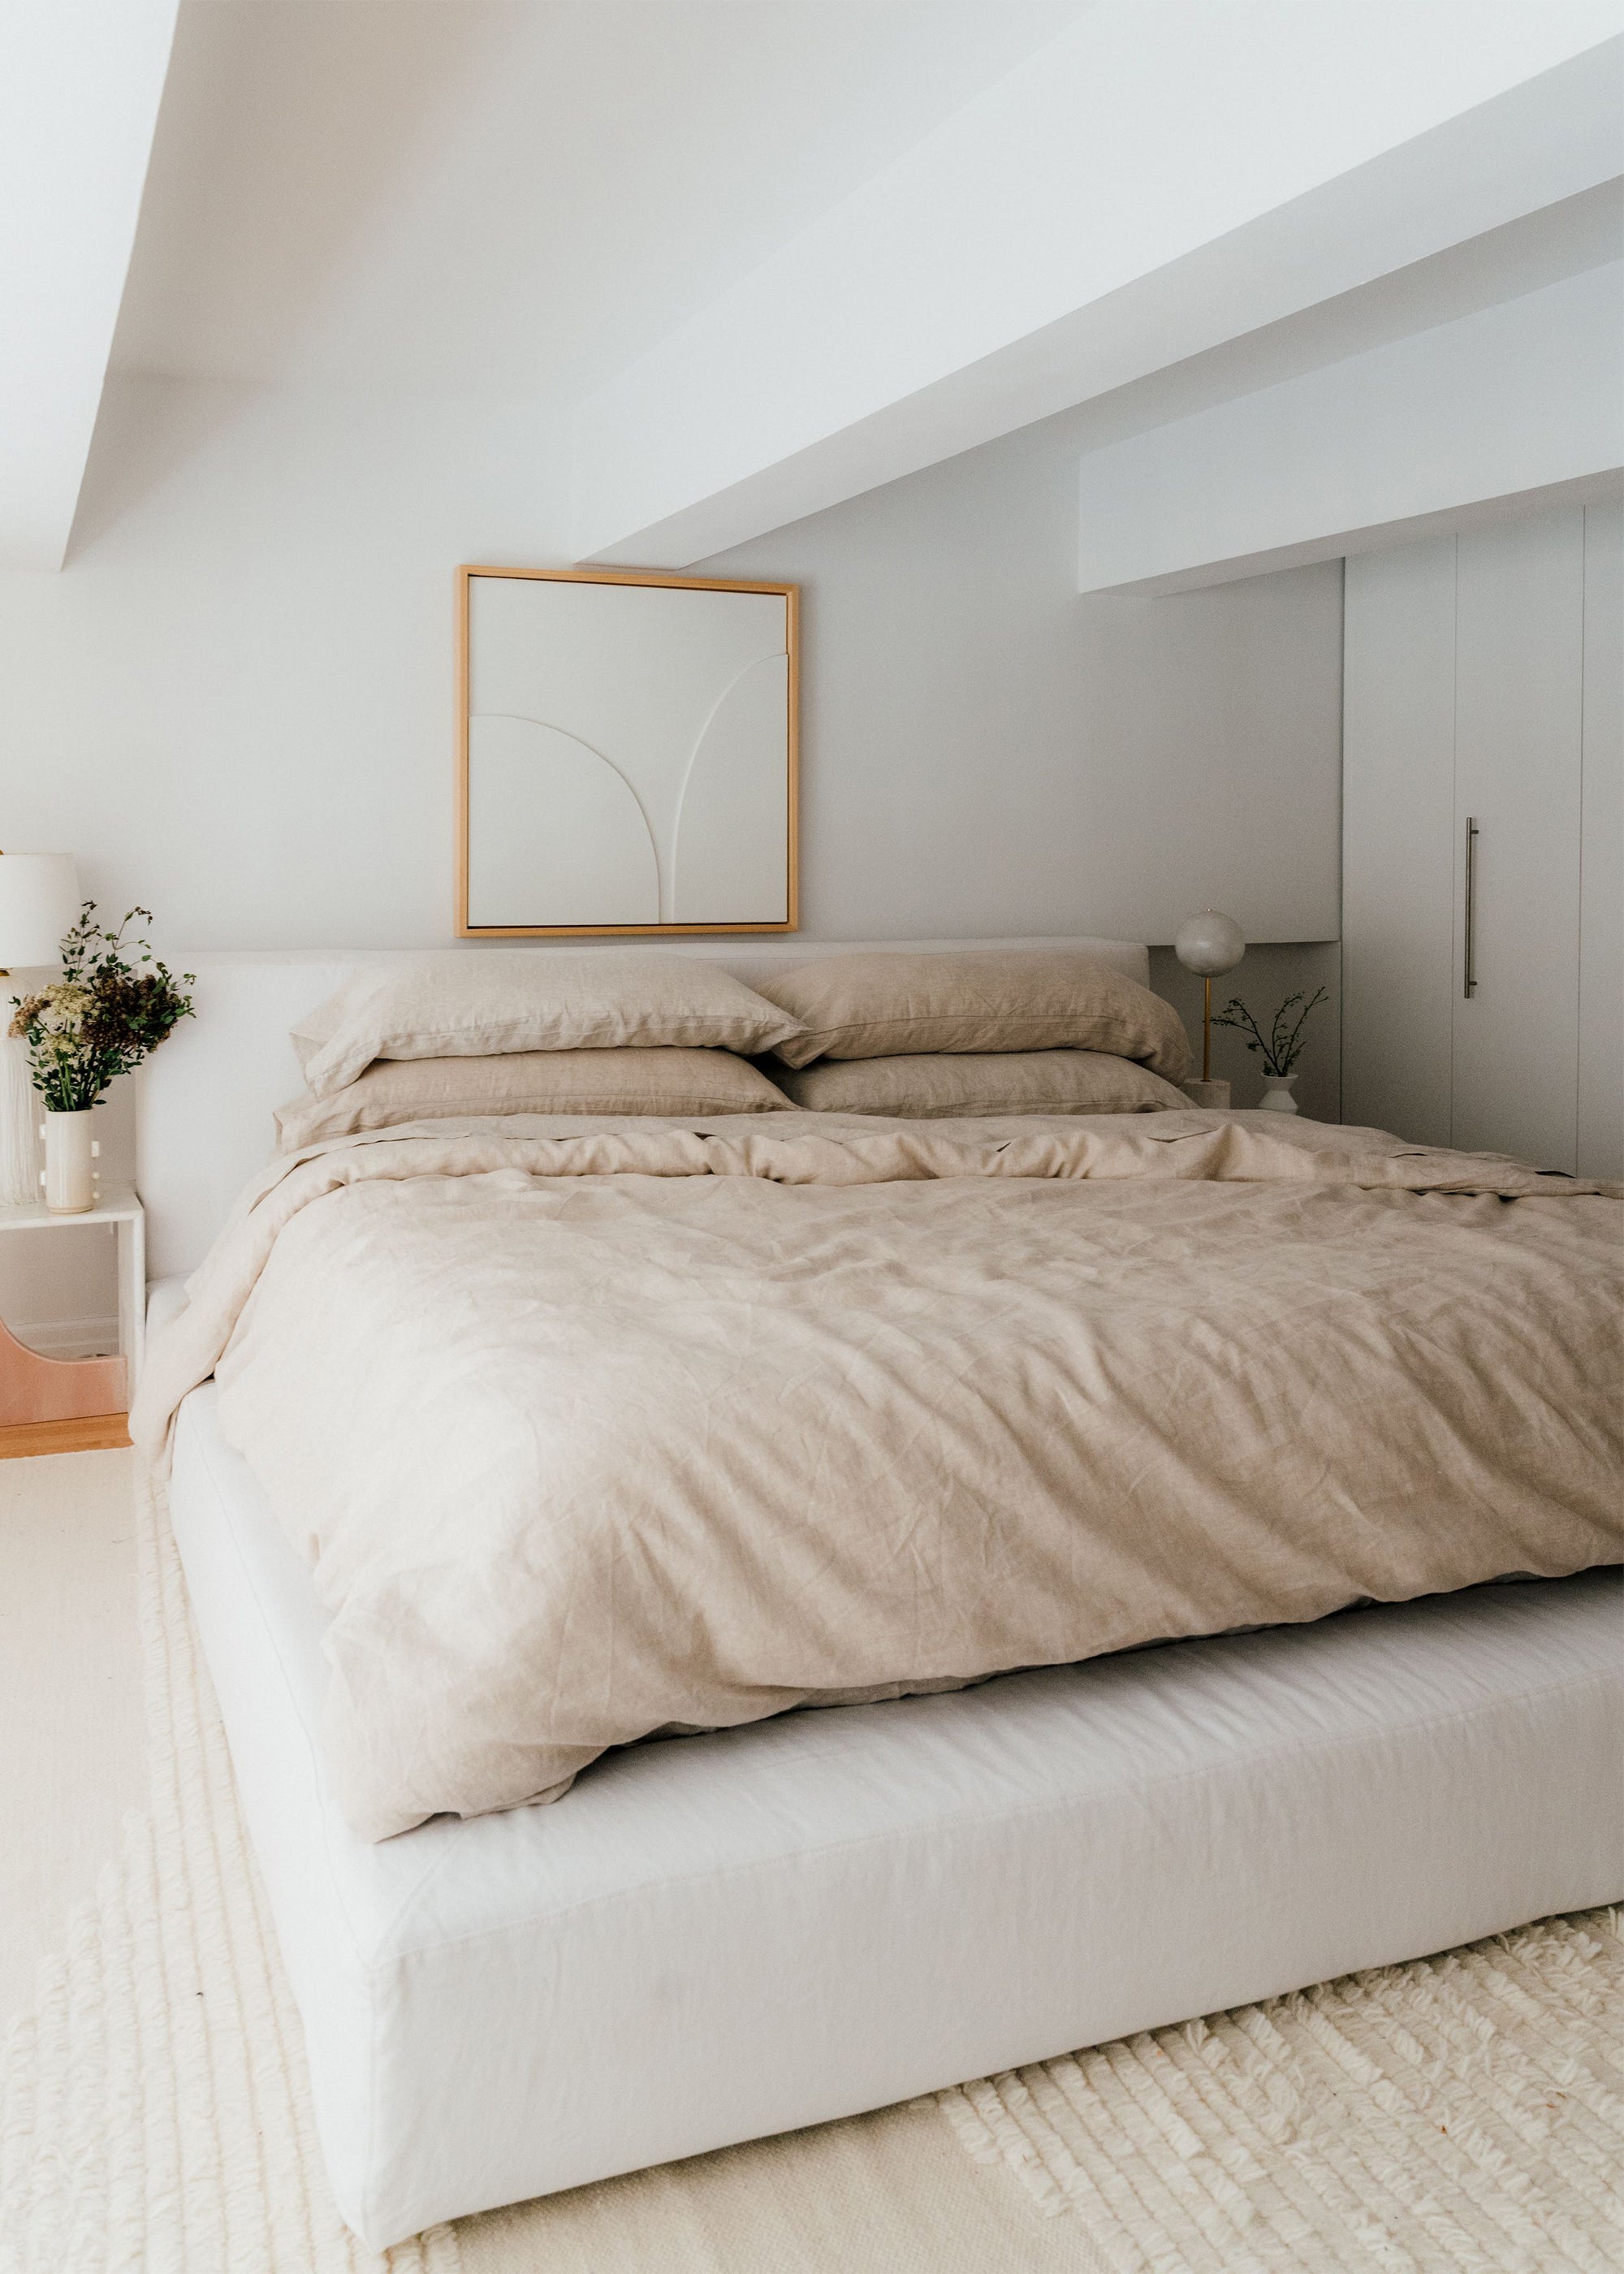 8 Small Bedroom Design Ideas to Make the Most of Your Petite Space – Bed  Threads